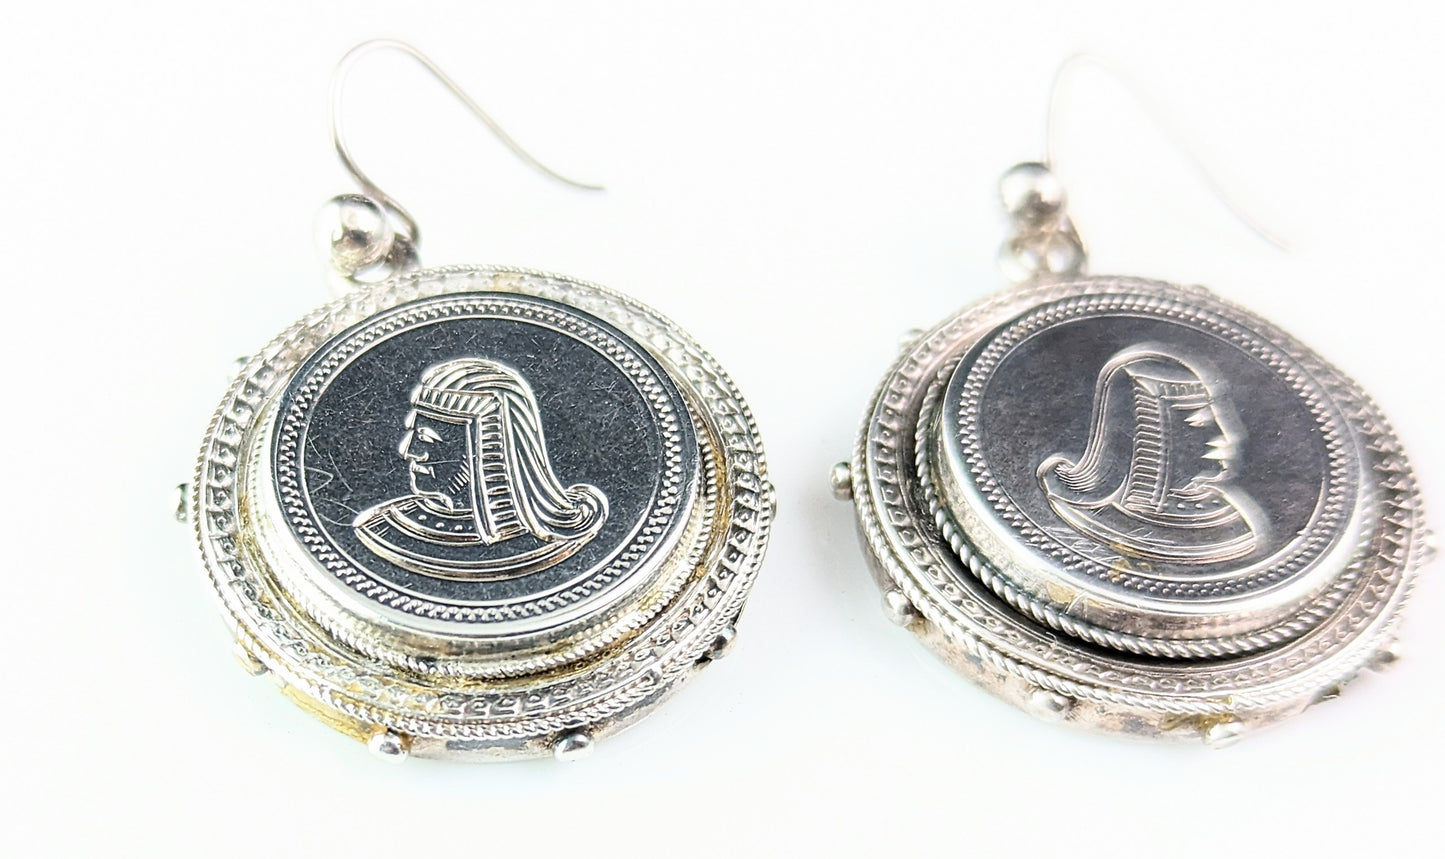 Antique Victorian sterling silver Assyrian revival earrings